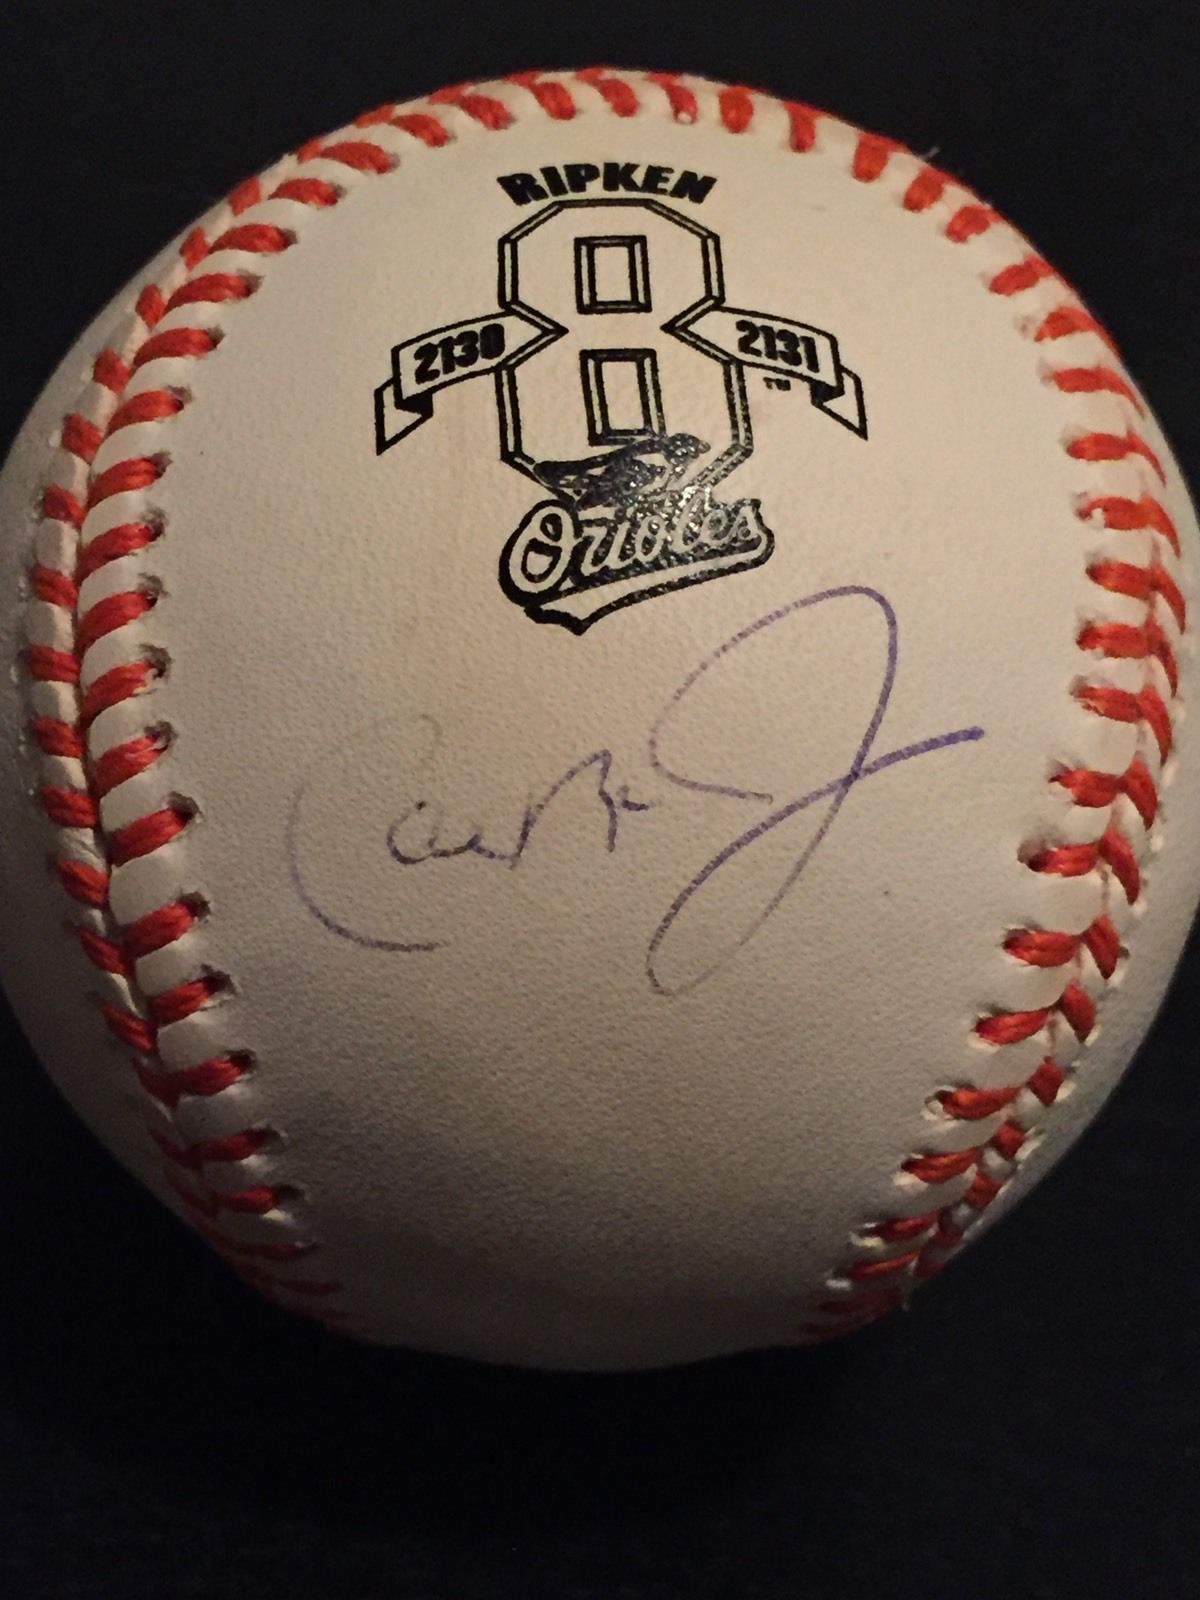 Some Autographed Baseballs Are Ticking Time Bombs